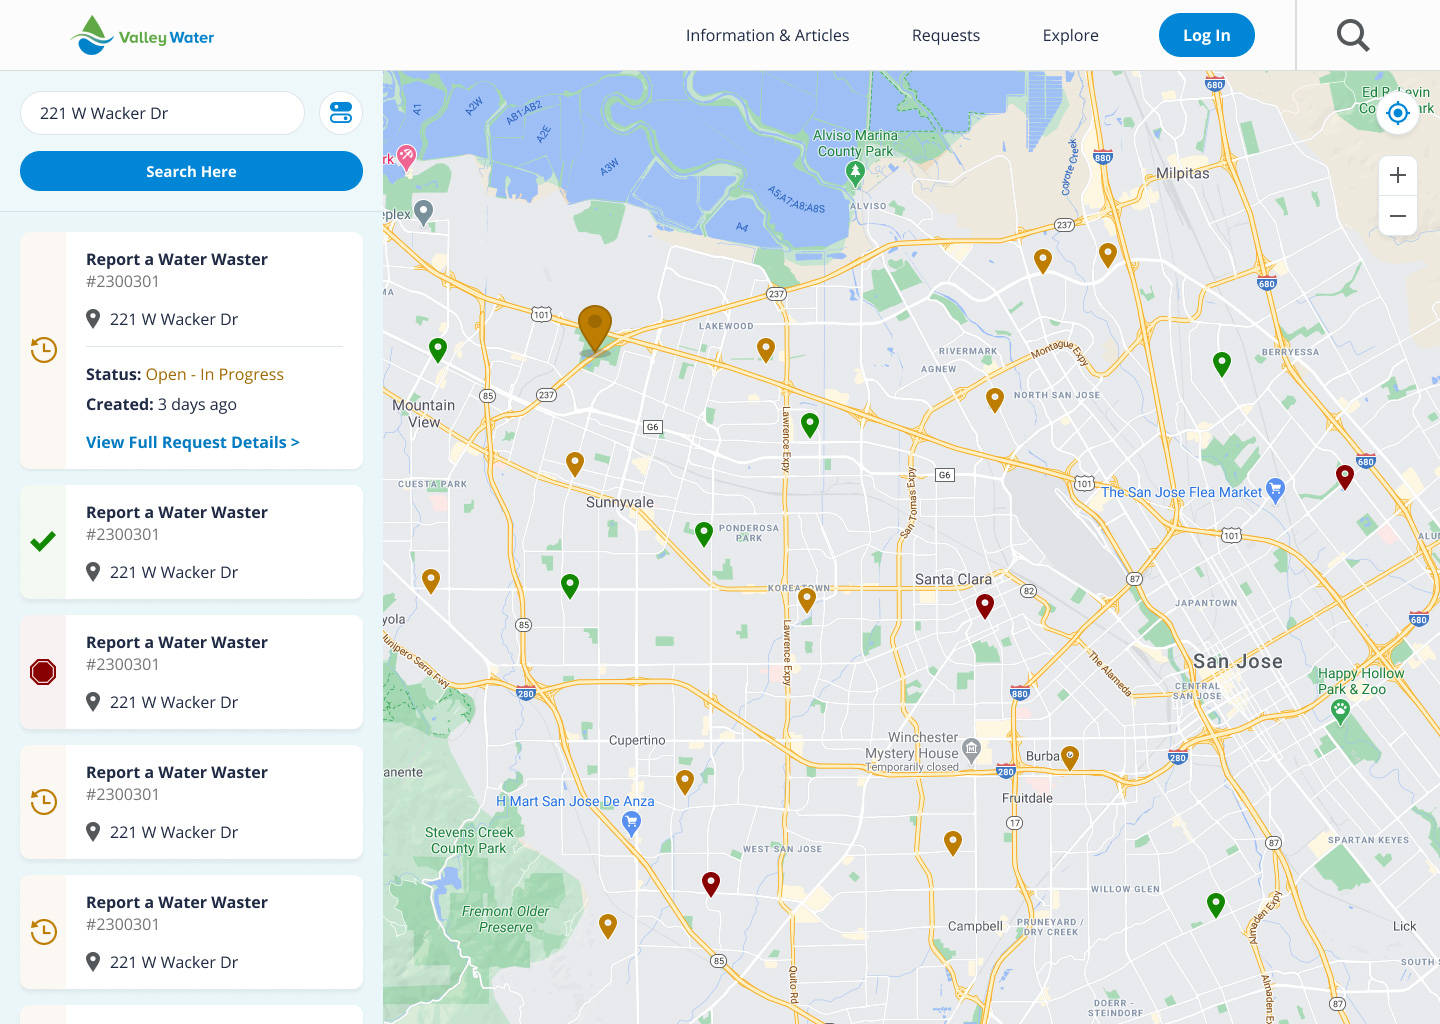 Screenshot of the Access Valley Water website request map, multiple requests with markers can be seen clustered together with information on each request.